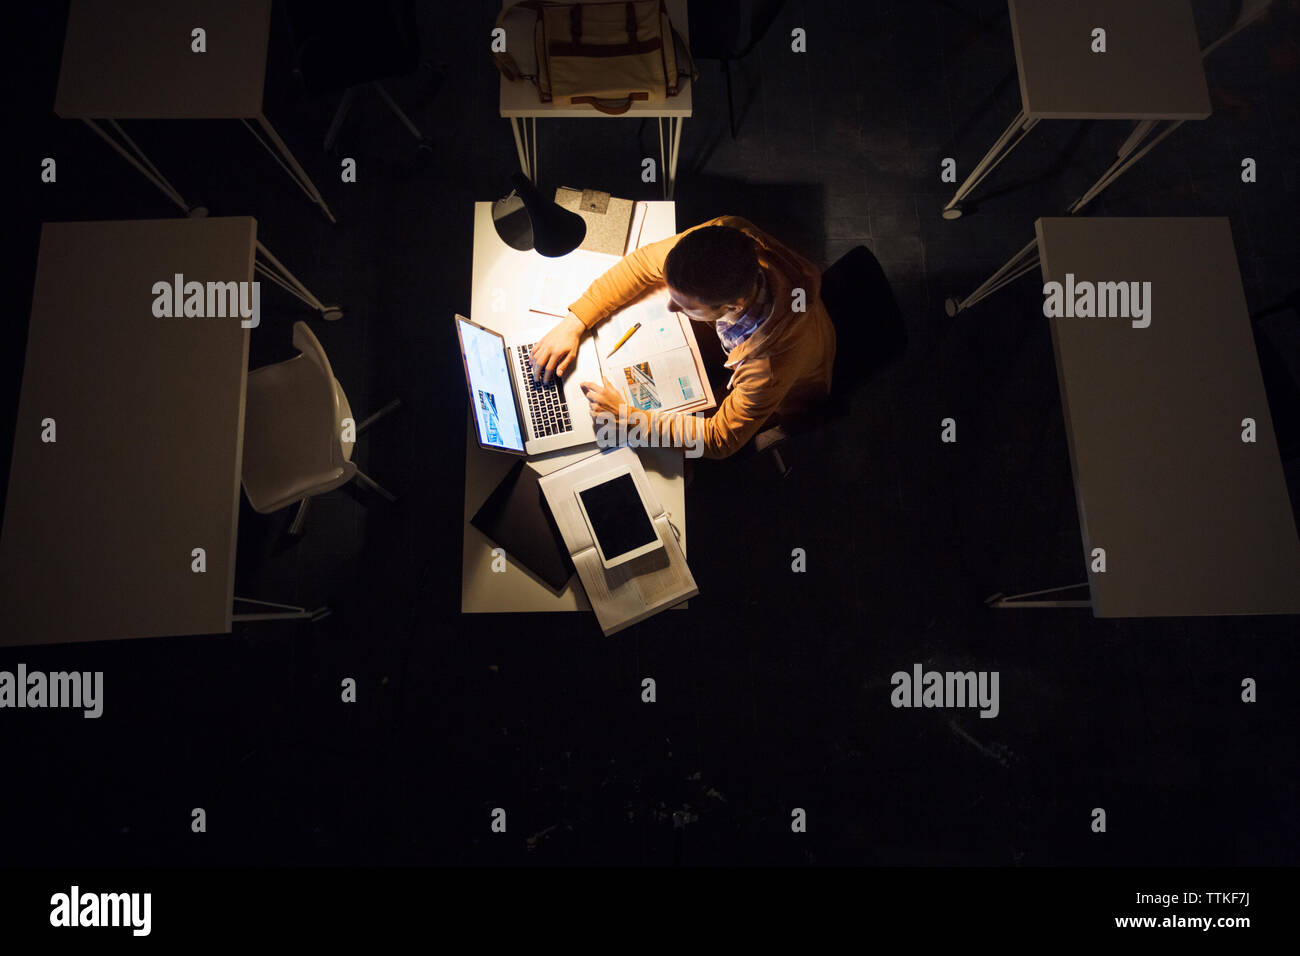 High angle view of man studying on laptop computer in library Stock Photo